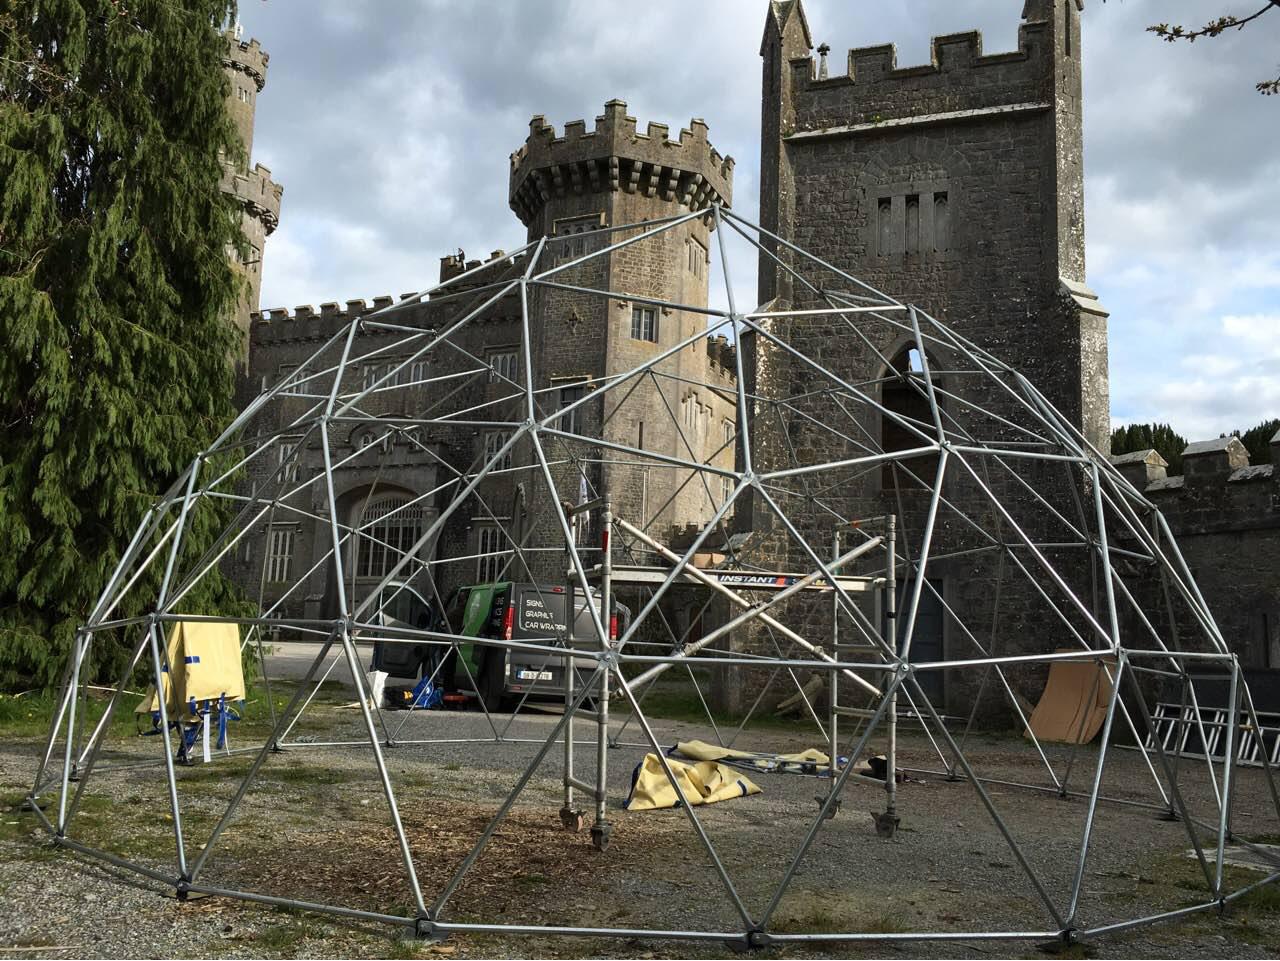 Portable Dome Ø8m for Charleville Castle Event, Tullamore, Ireland